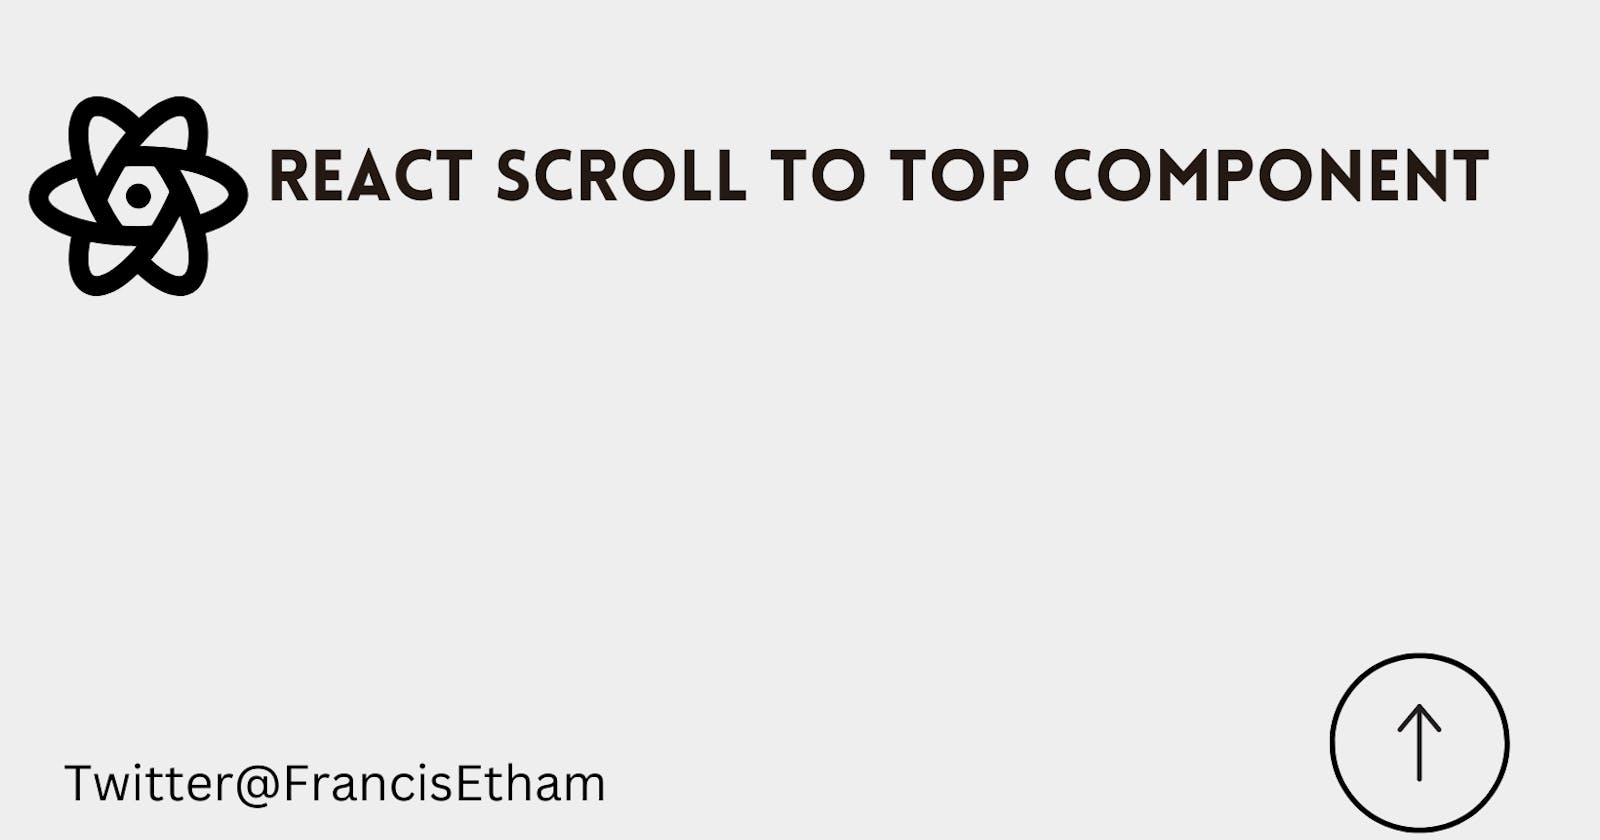 Scroll to top component react